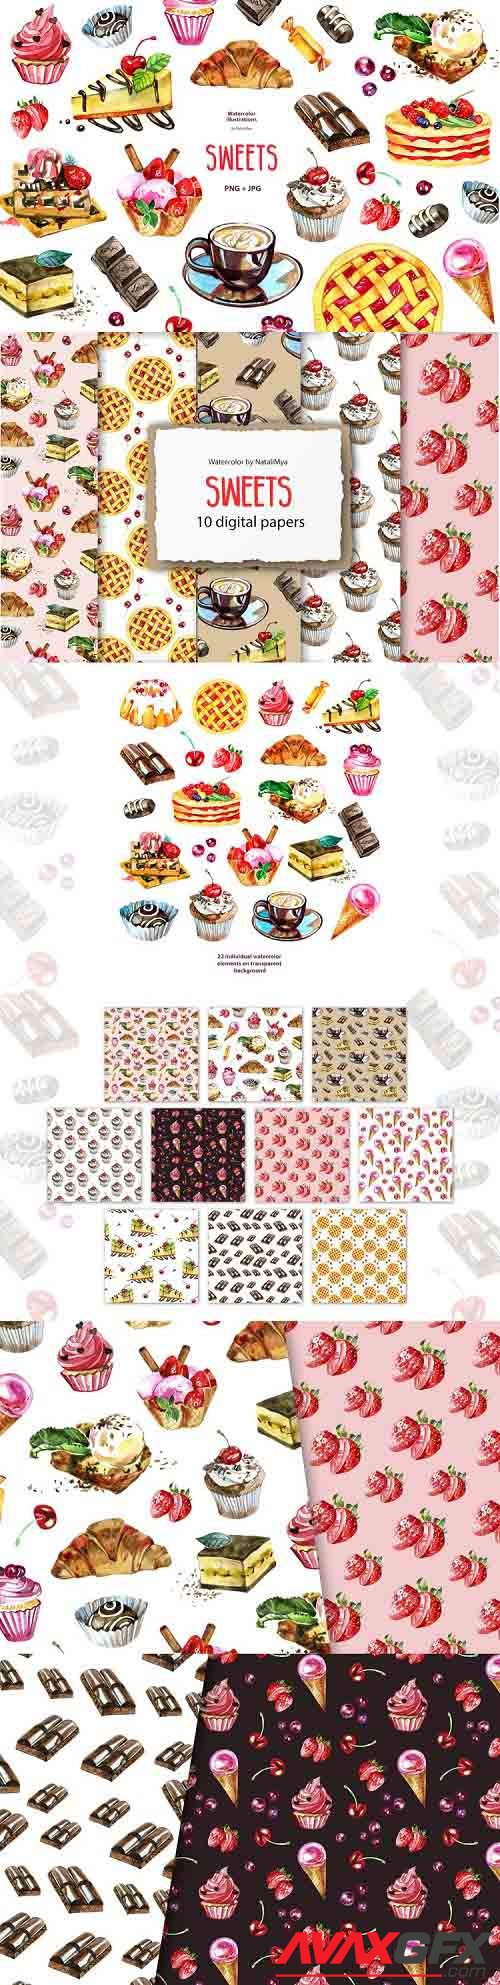 Watercolor sweets clipart and digital paper pack - 1239210 - 1240714